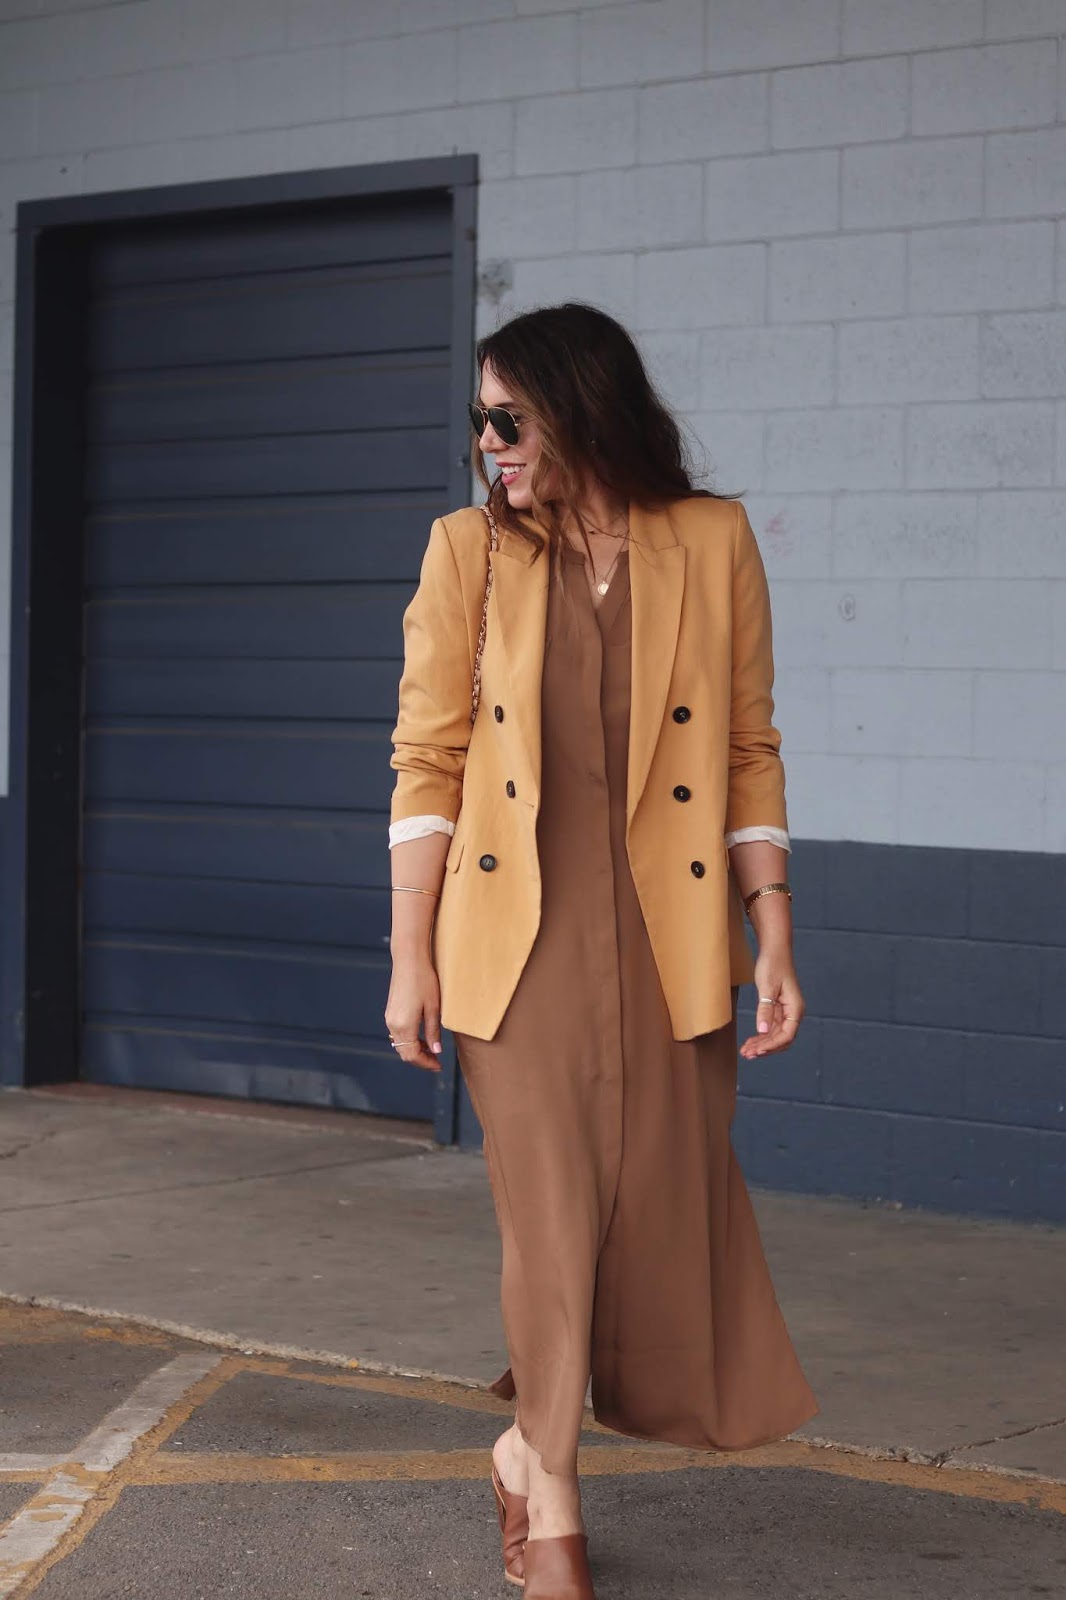 Le Chateau maxi dress and blazer outfit aleesha harris yellow blazer outfit